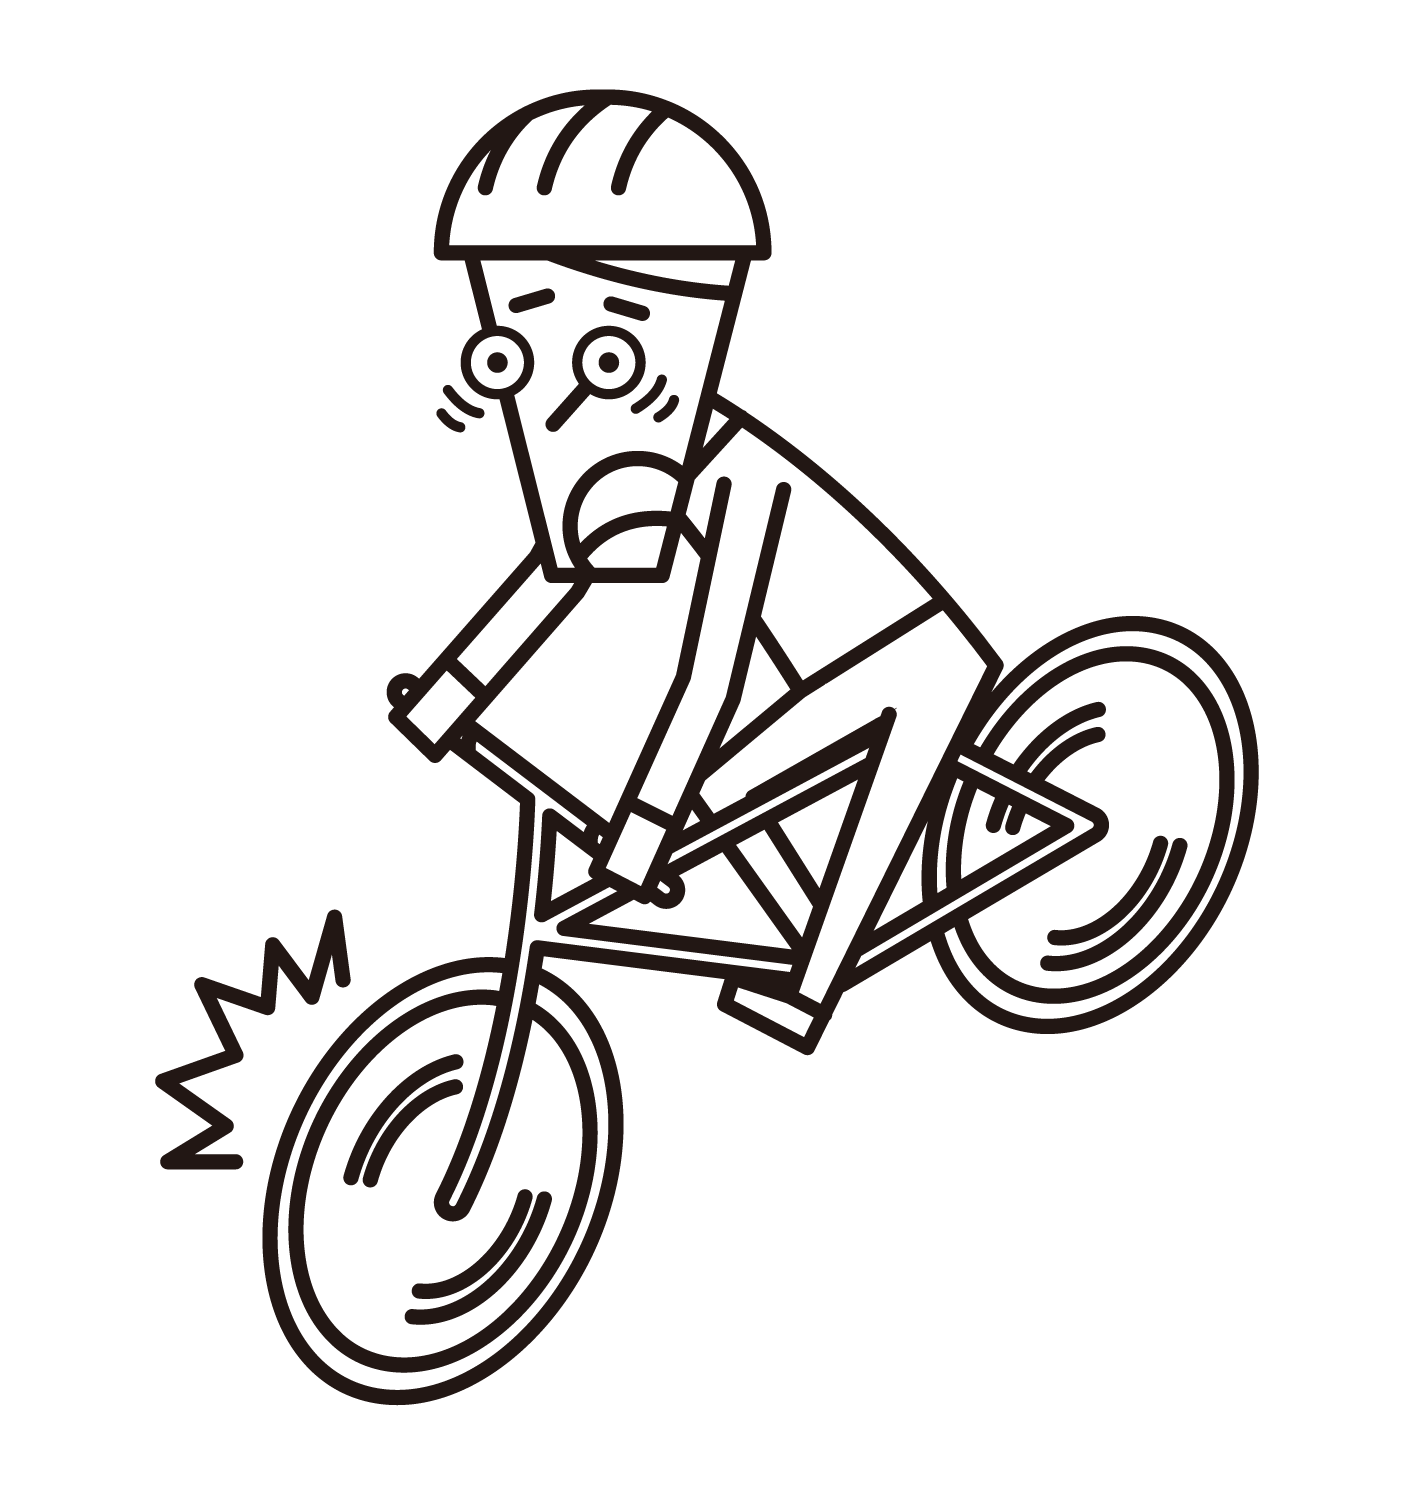 Illustration of a cyclist (male) who brakes suddenly